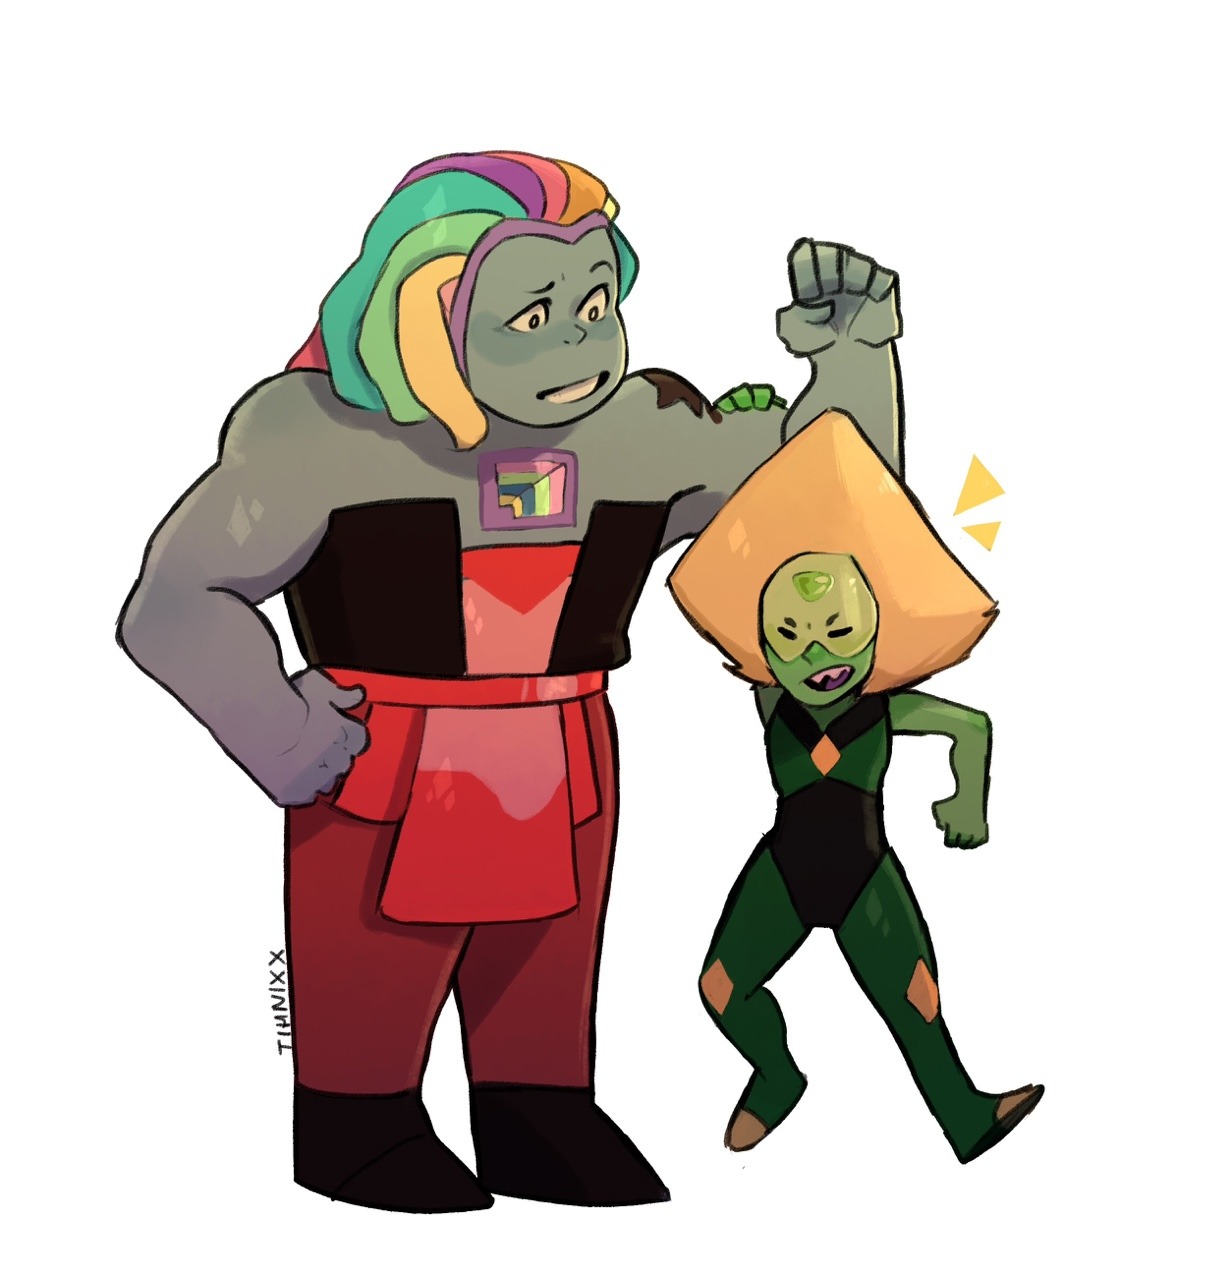 “hey, bismuth! Launch me again I wanna show to that clods who rules !! “